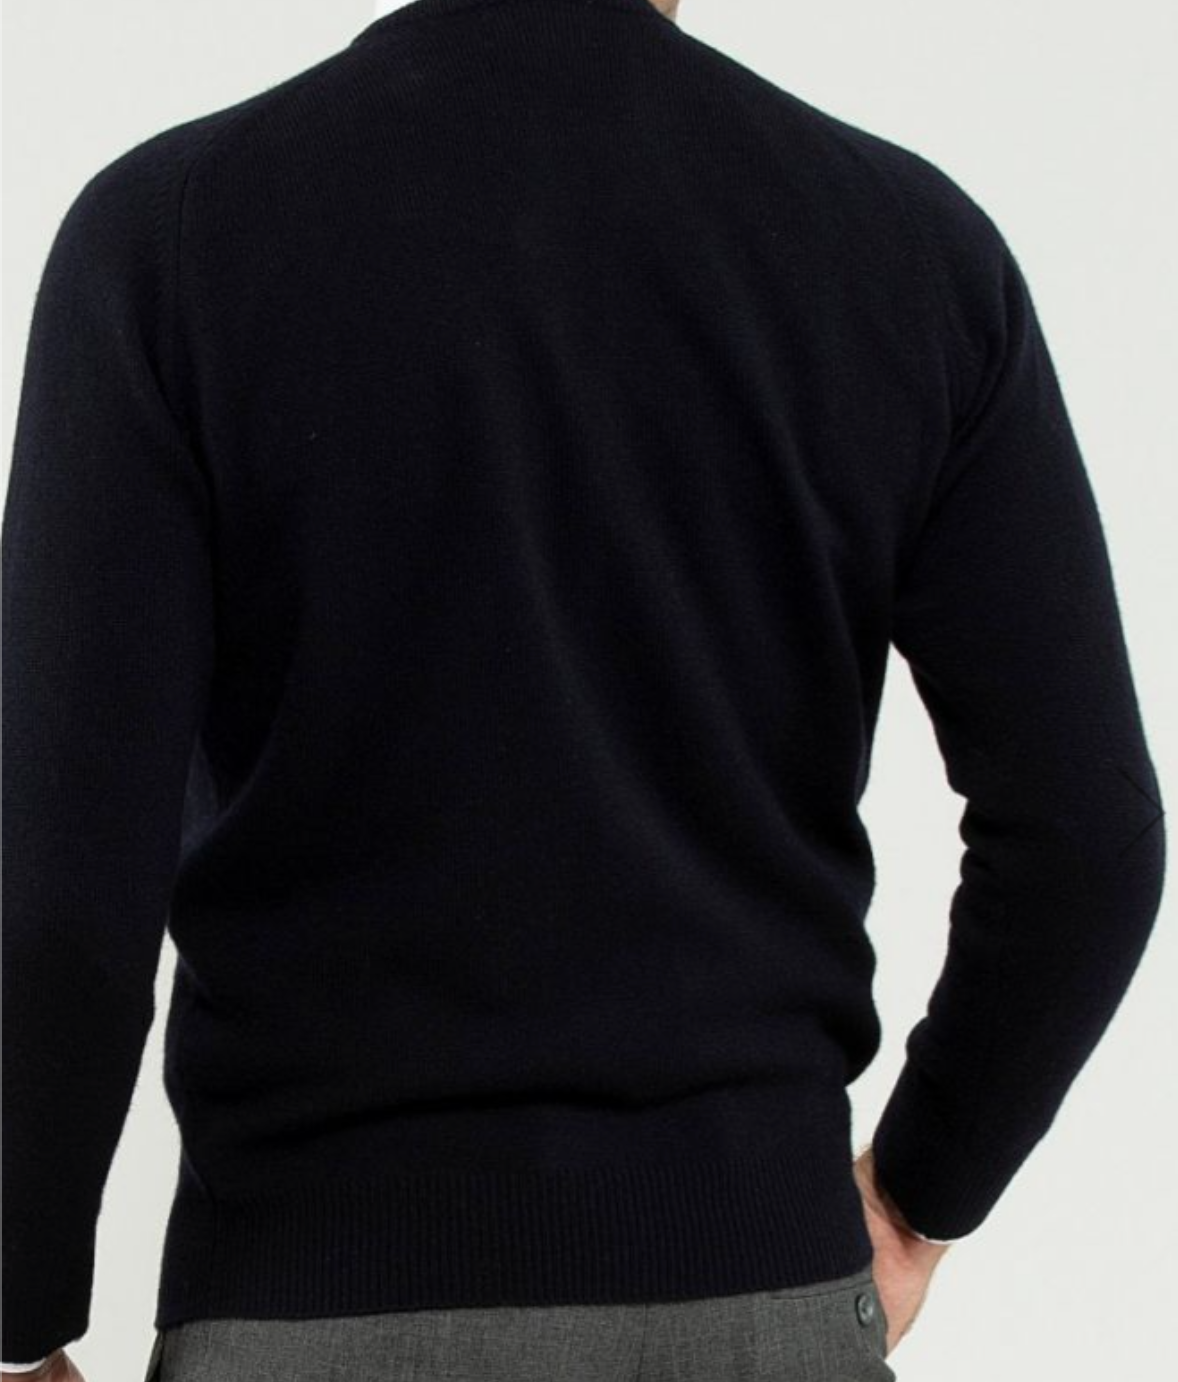 Alan Paine Sweater - Navy Dorset Lambswool Saddle Shoulder Crew Neck Sweater - Classic Fit